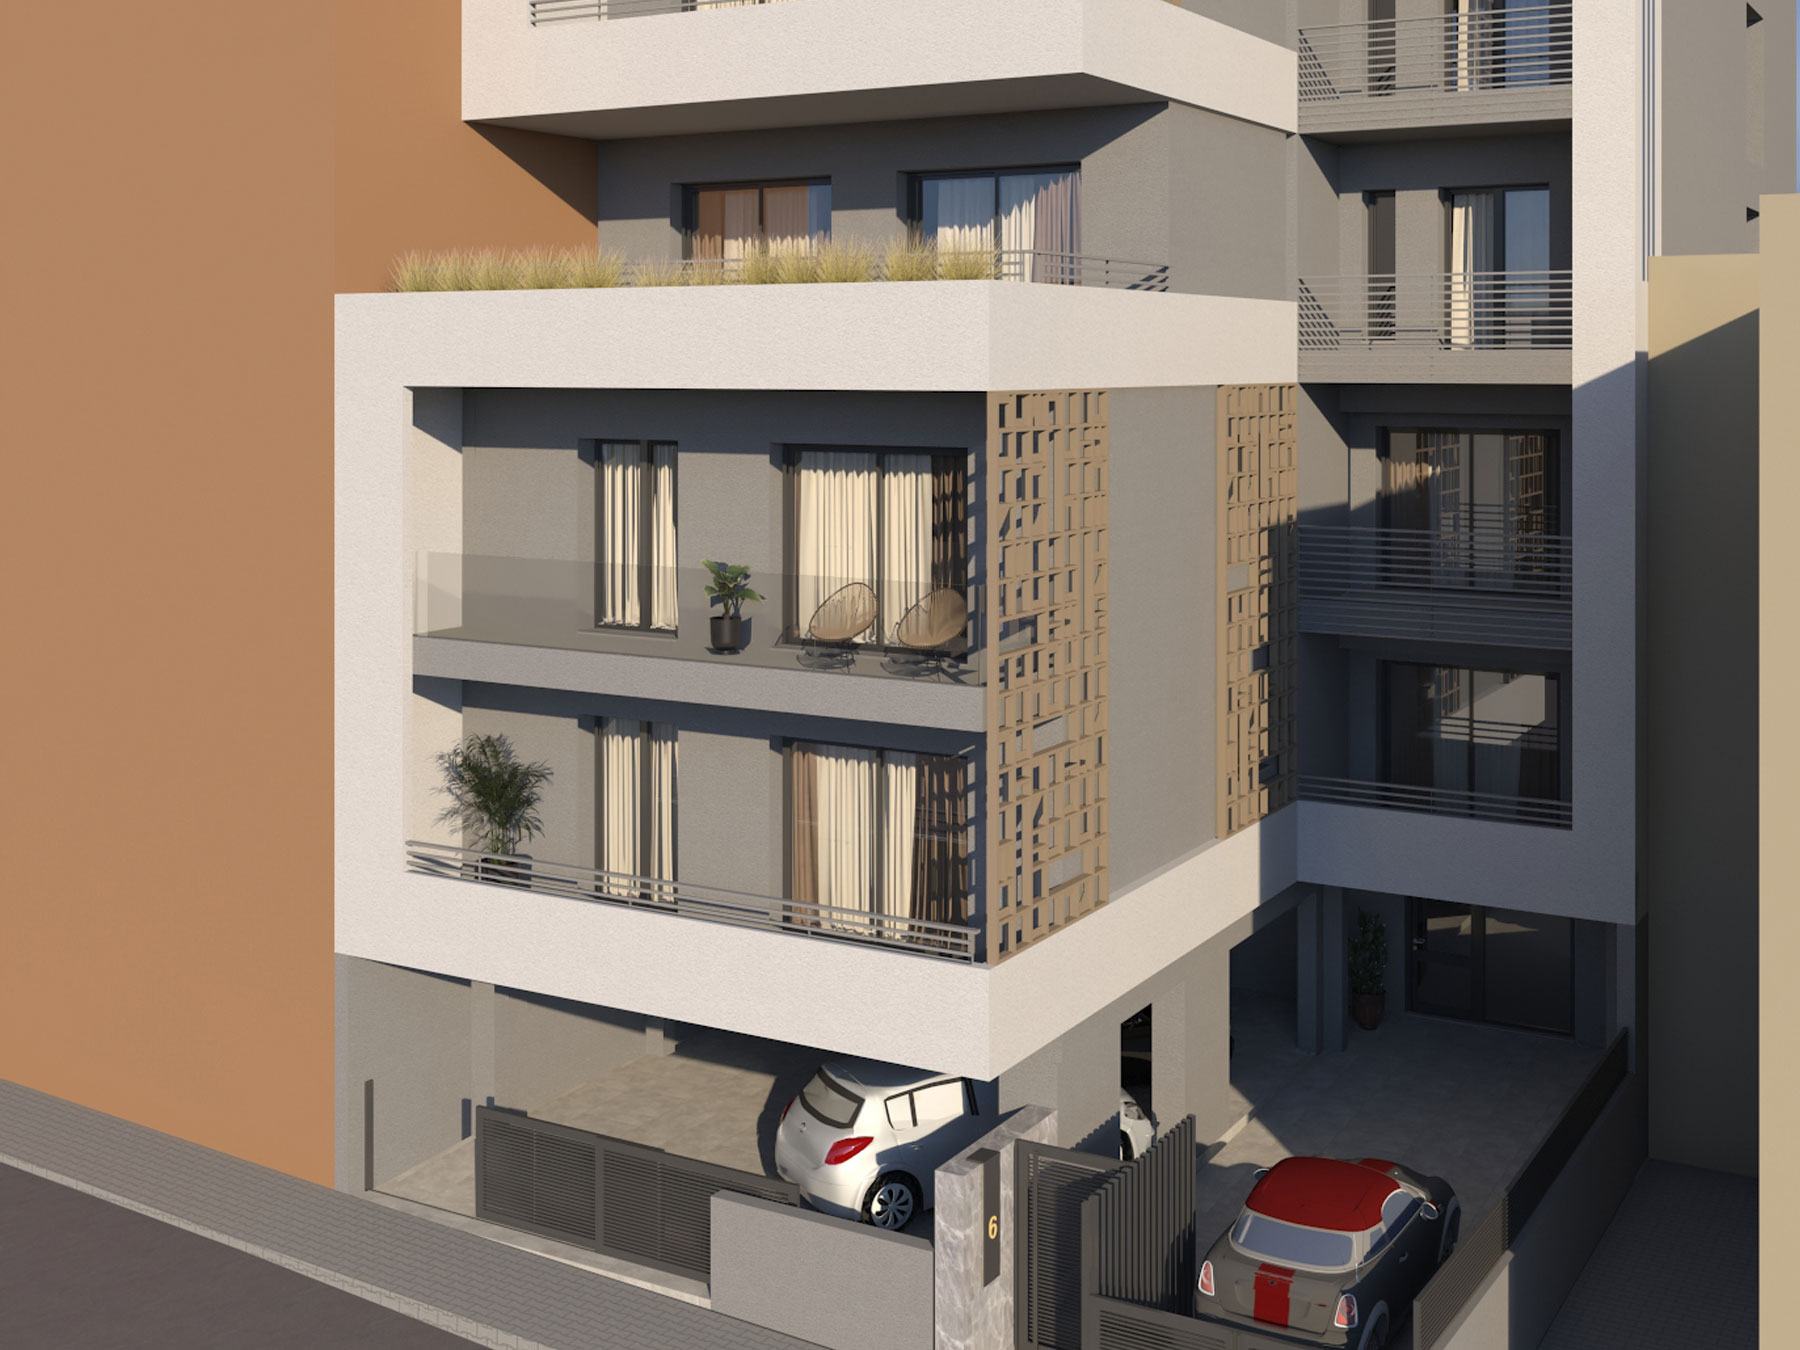 For sale, under construction, 2 bedroom apartment, 2nd floor, 73 sq.m. in the center of Ioannina near Alsos